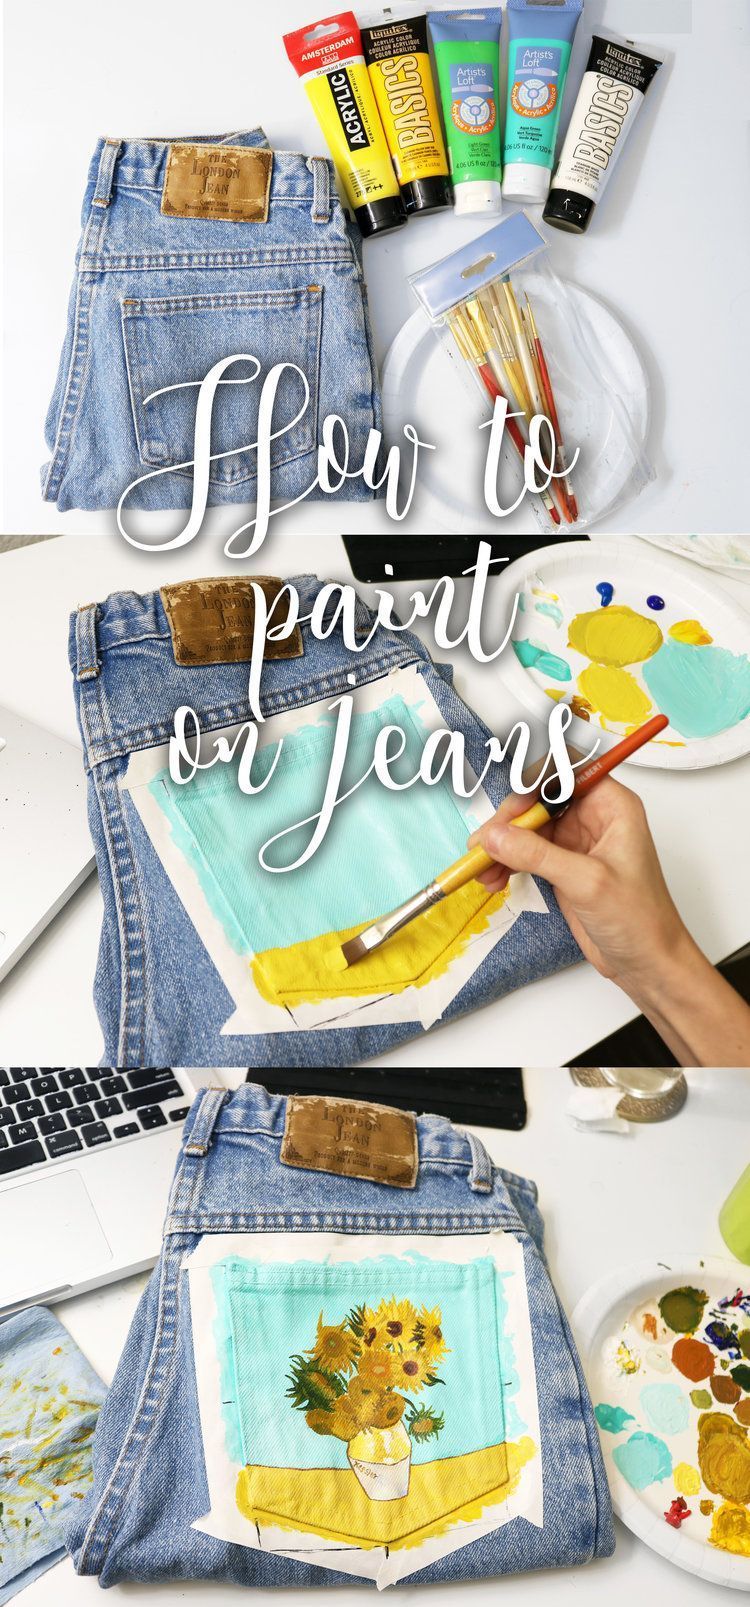 How to Paint On Jeans (5 steps with pictures) -   13 DIY Clothes Paint projects ideas